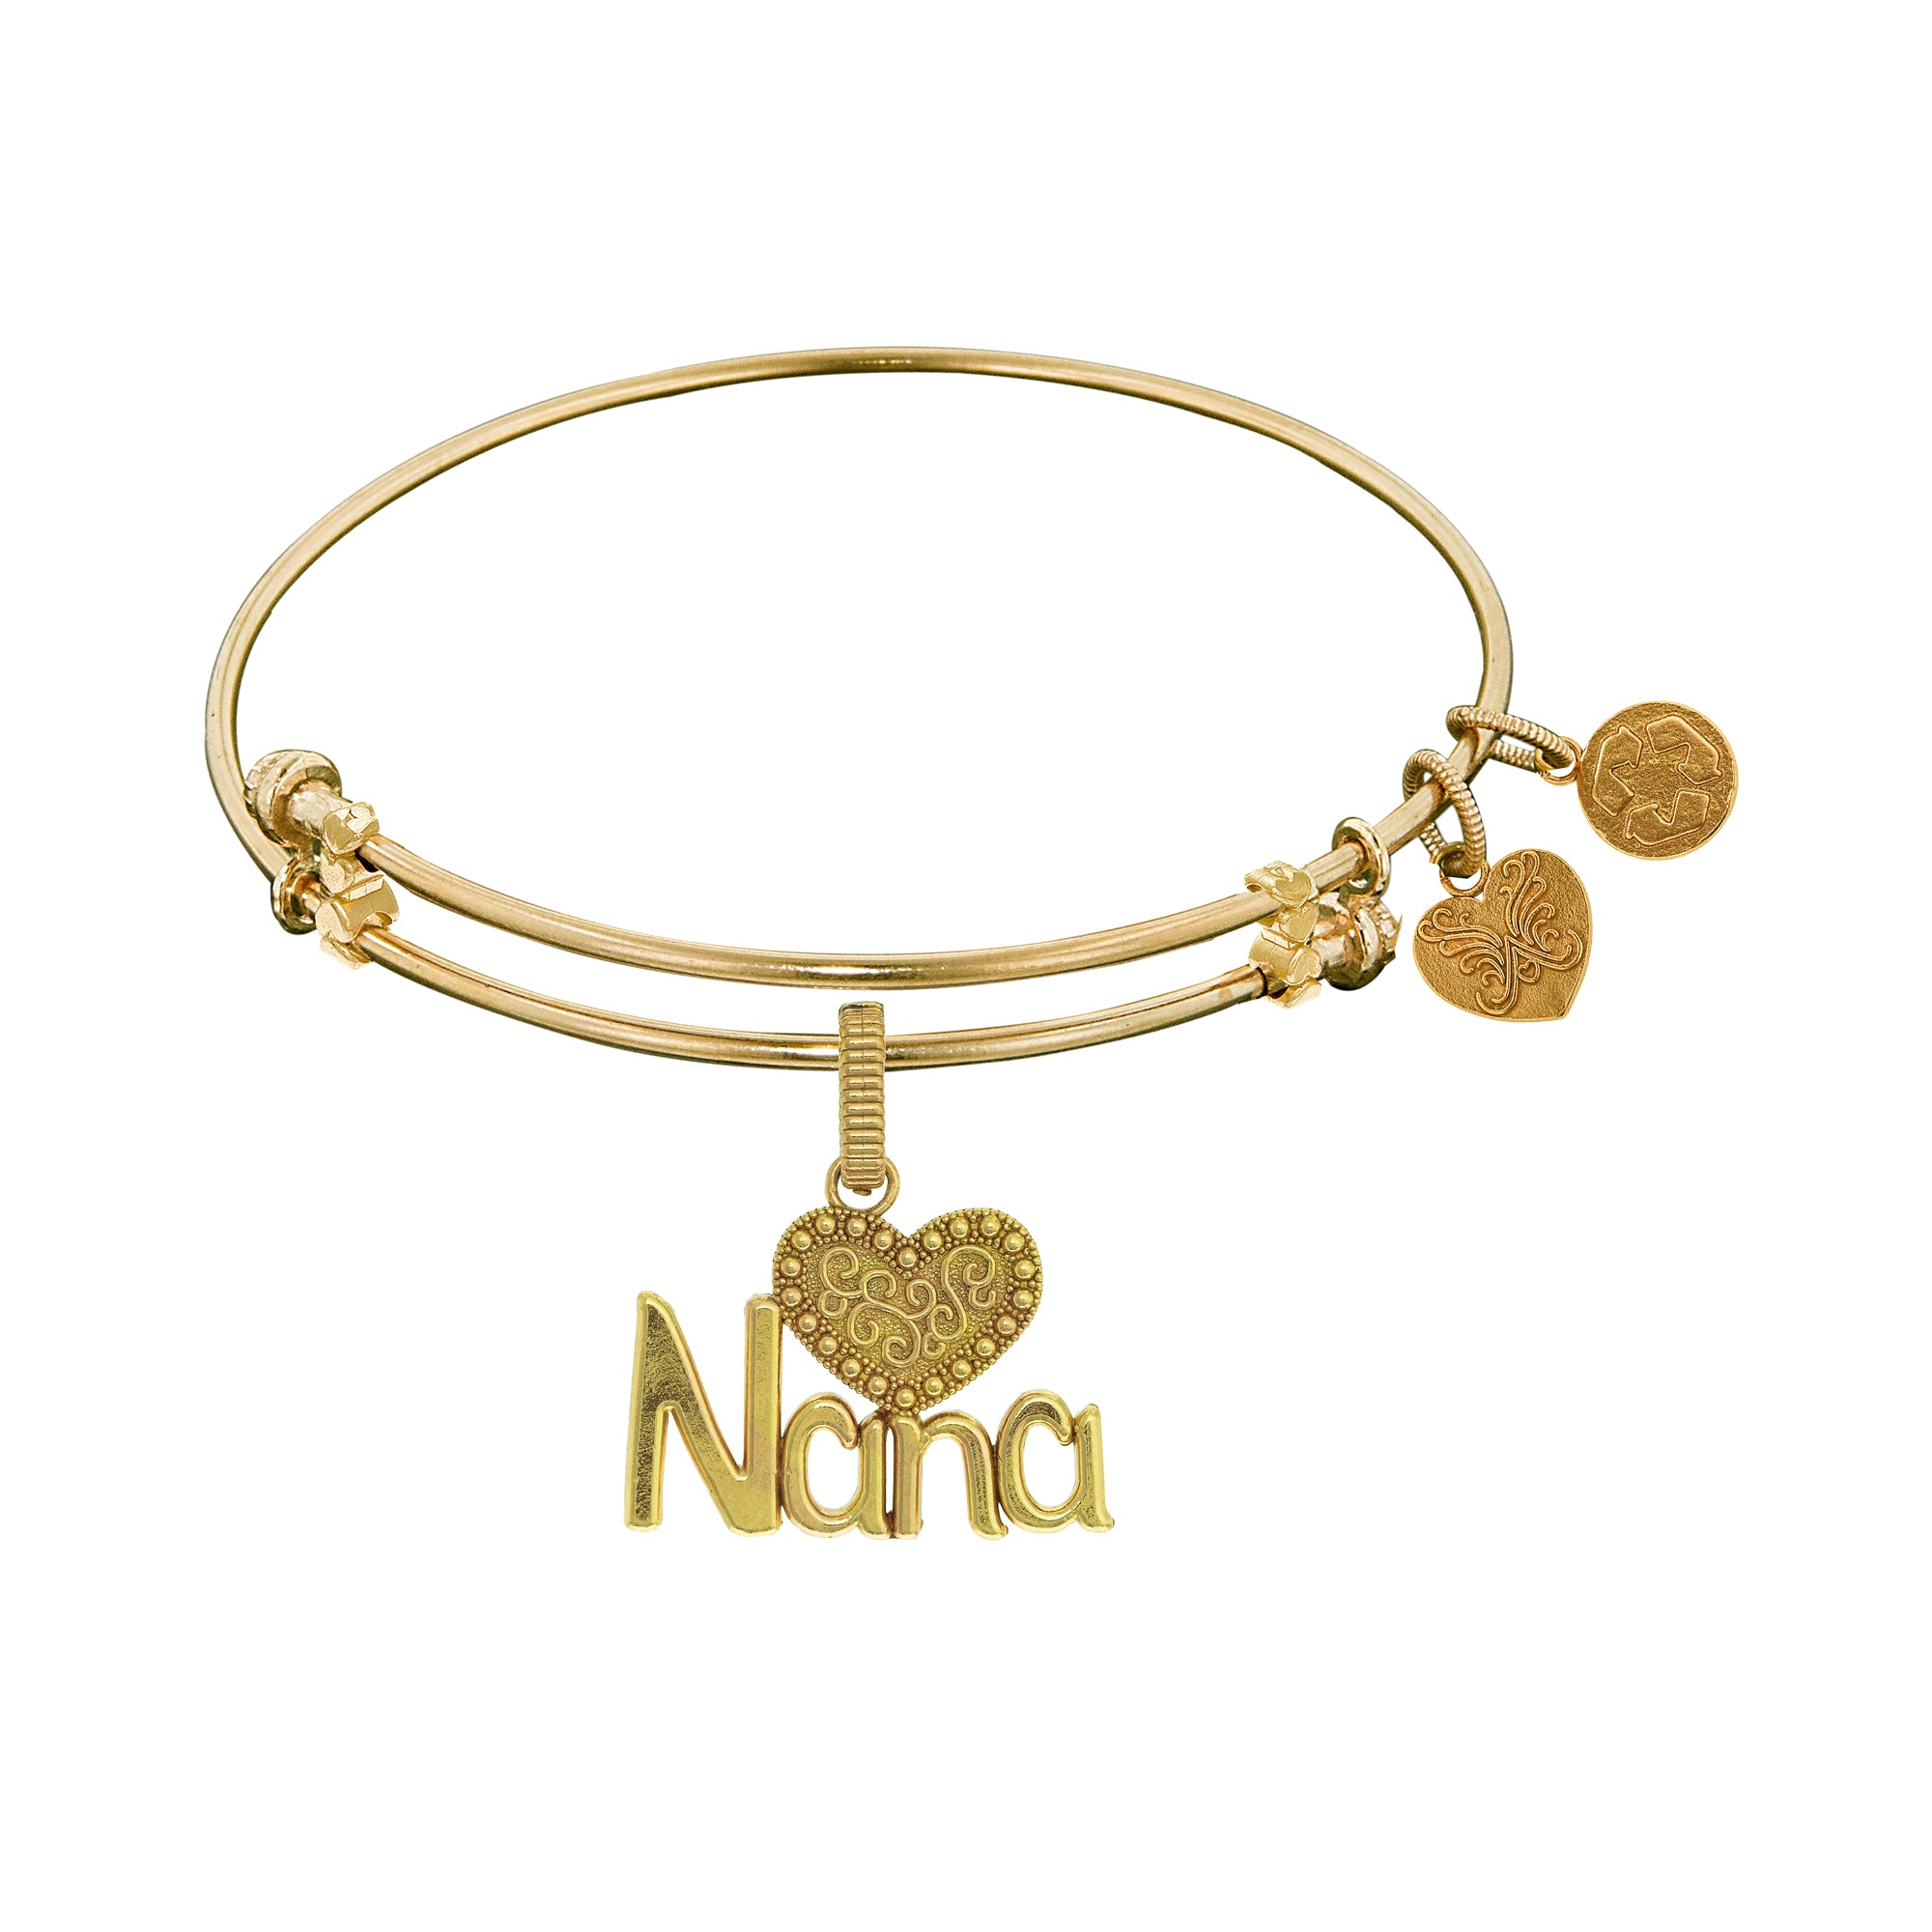 Nana With Heart Charm Expandable Bangle Bracelet, 7.25" fine designer jewelry for men and women